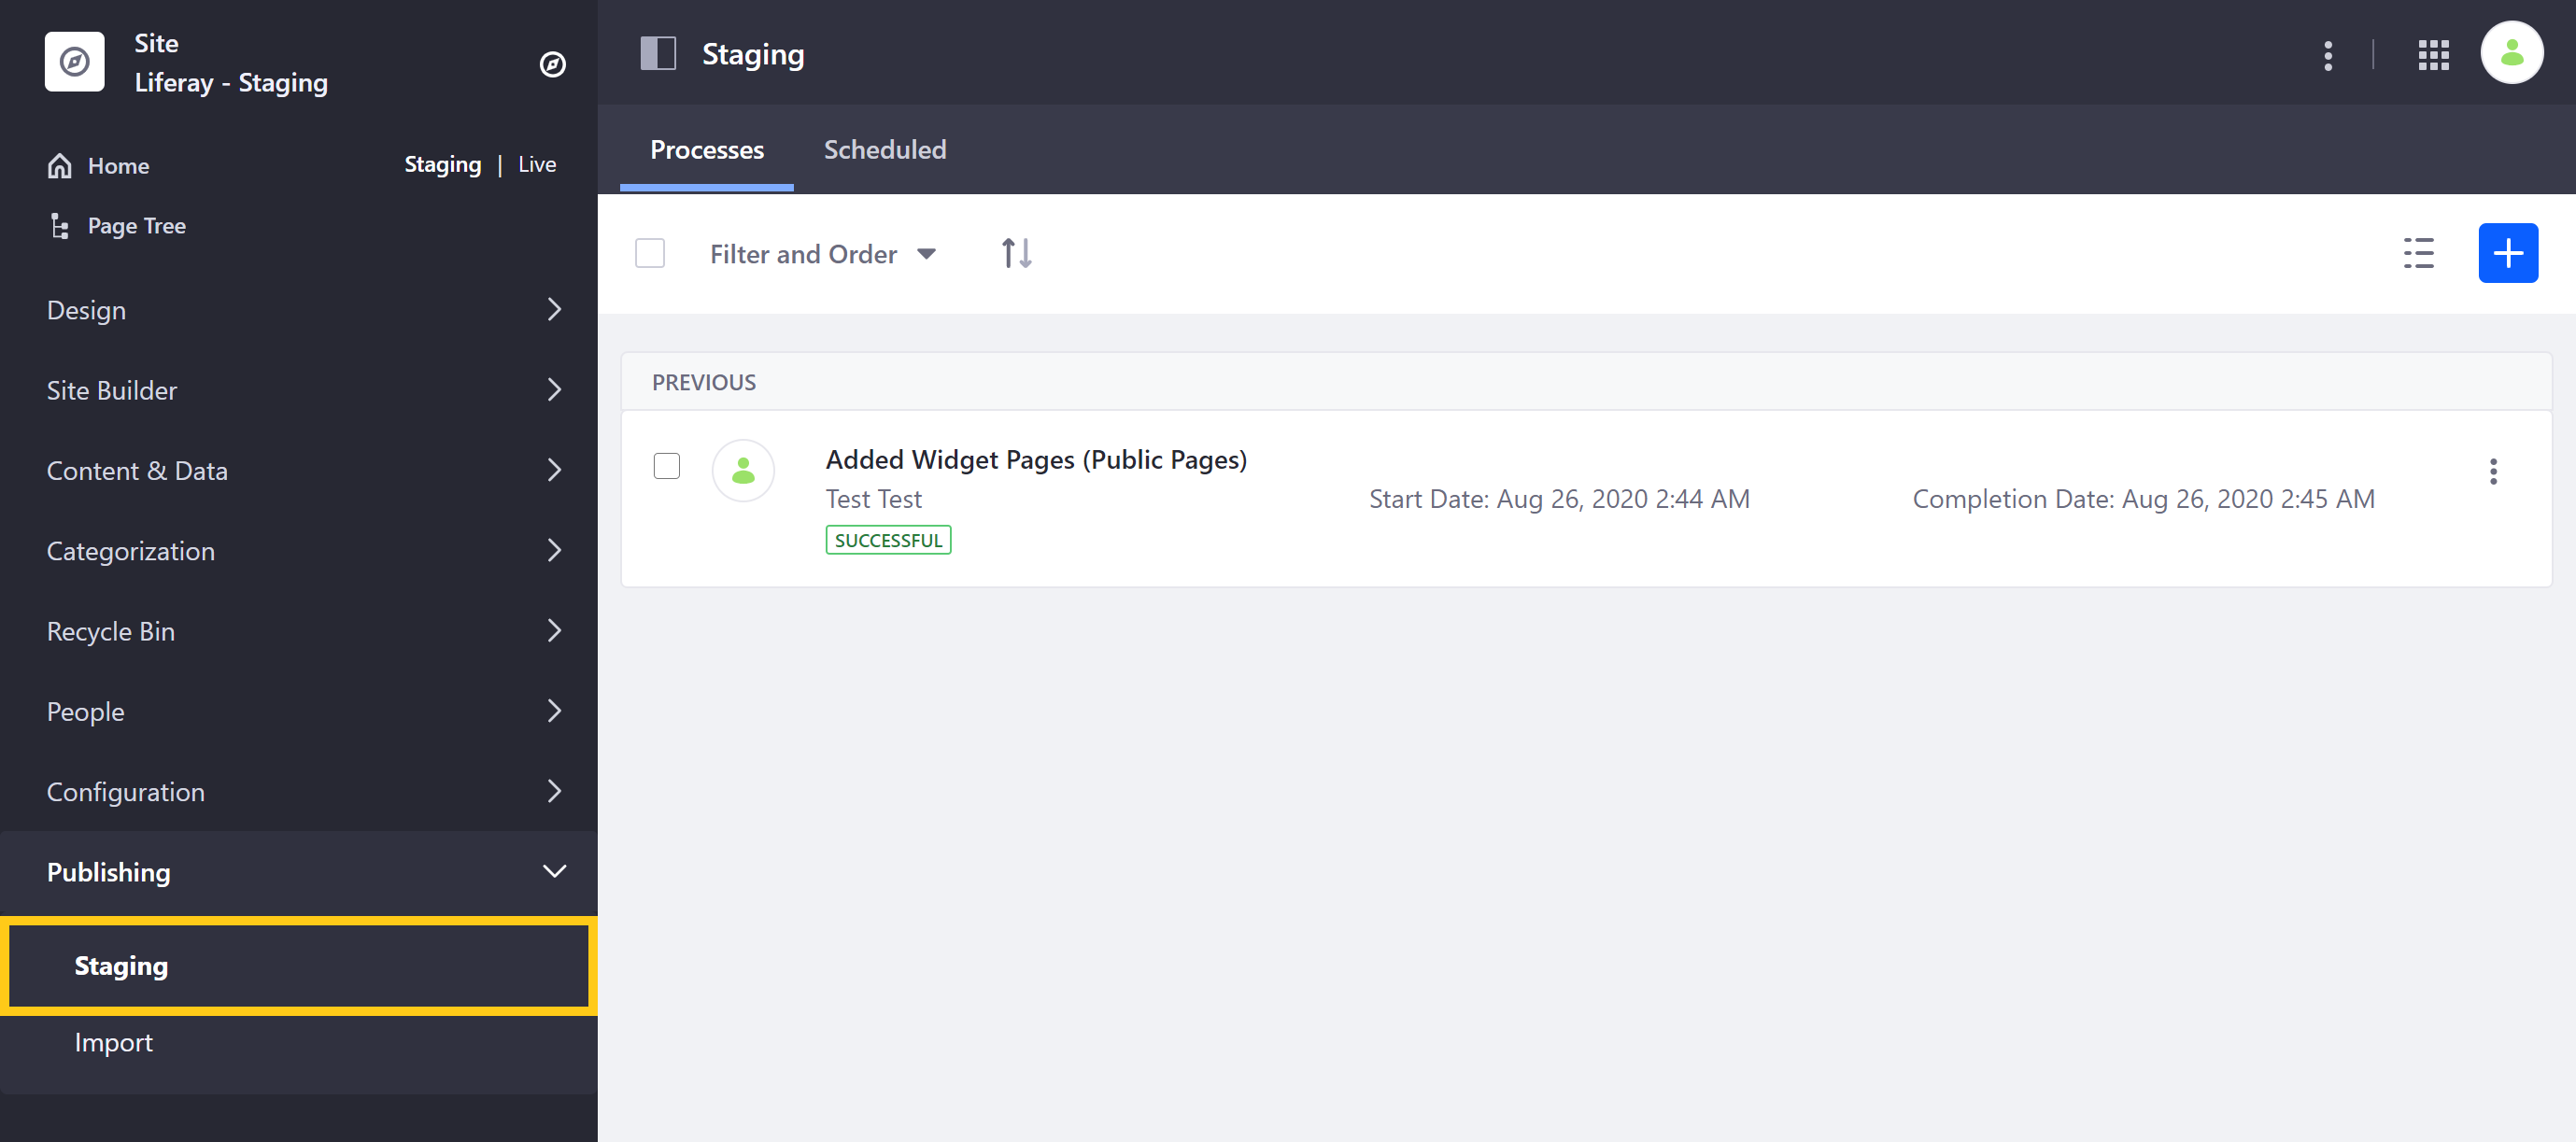 You can also access new options in the Staging page.